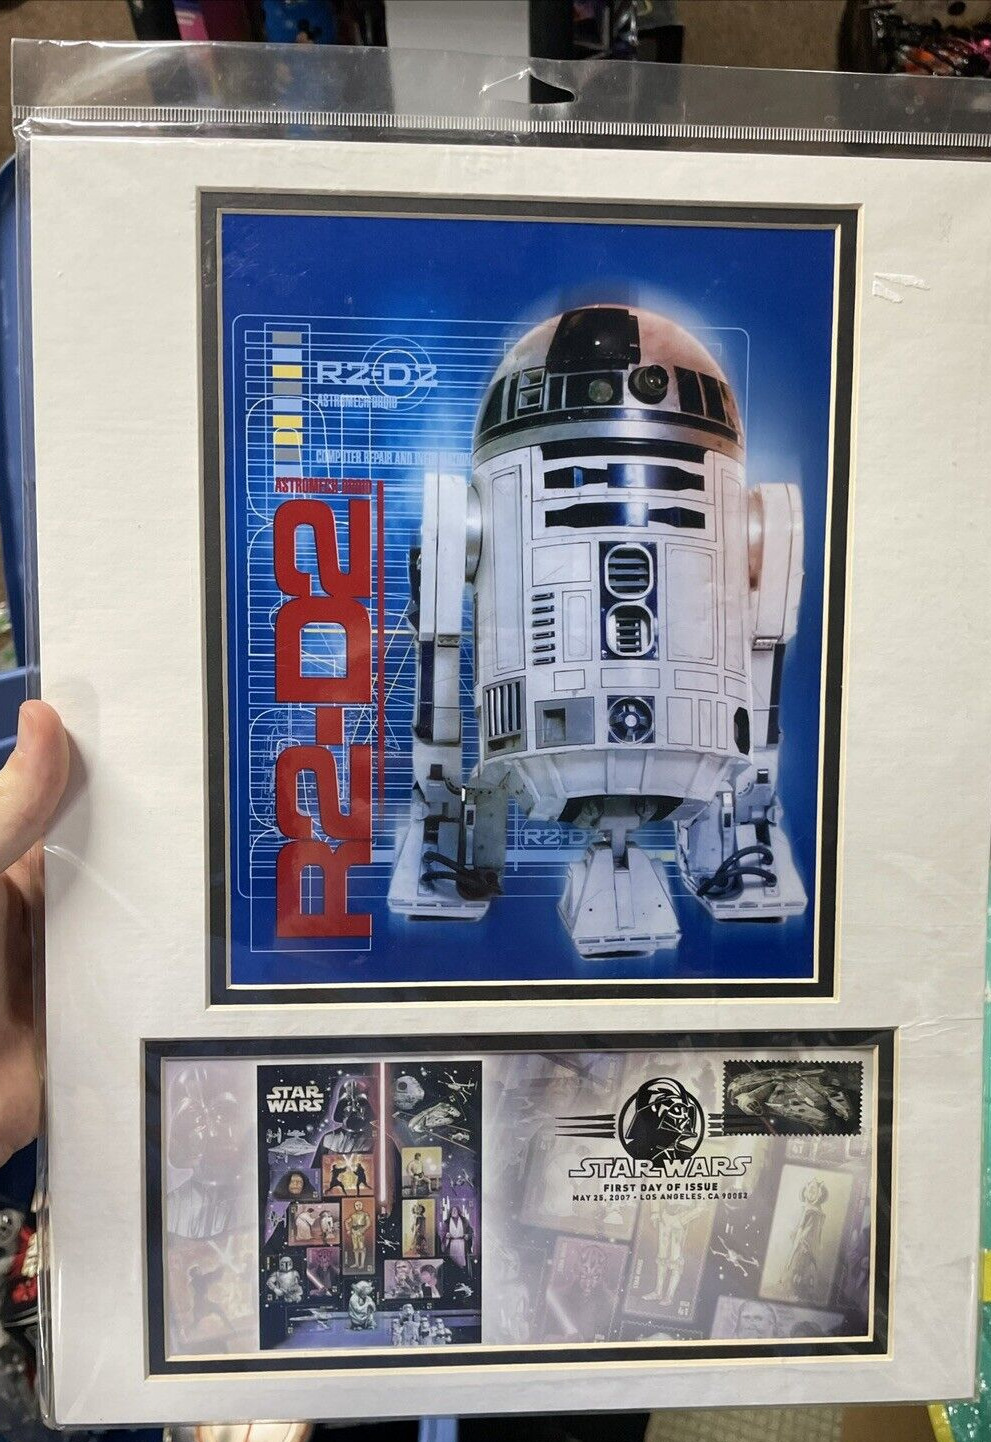 STAR WARS R2-D2 Stamp First Day Of Issue May 25 2007 Matted Art Poster R2D2